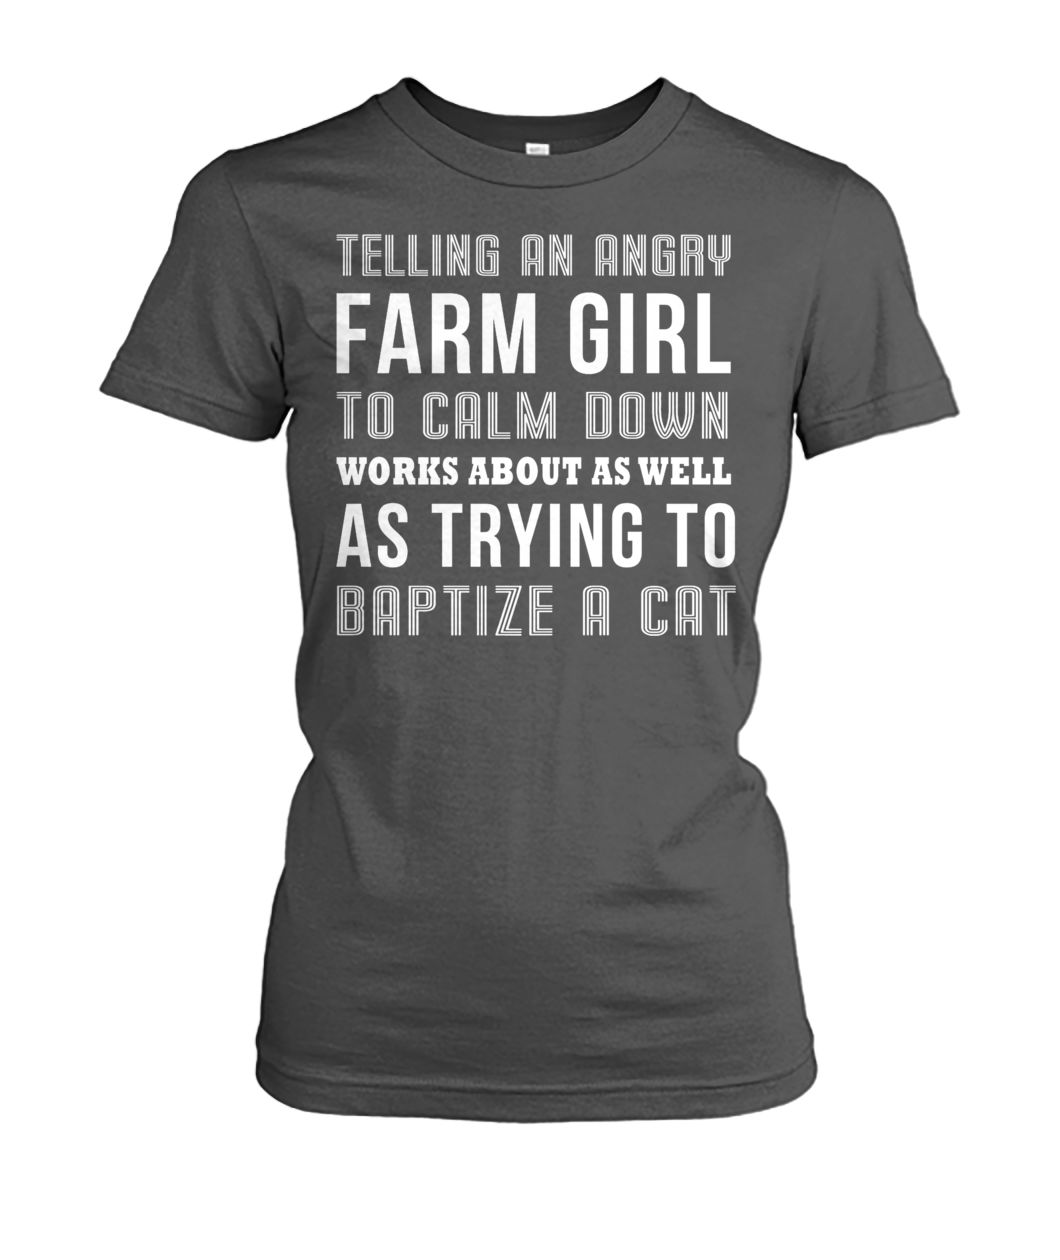 Telling an angry farm girl to calm down works about as well as trying to baptize a cat women's crew tee